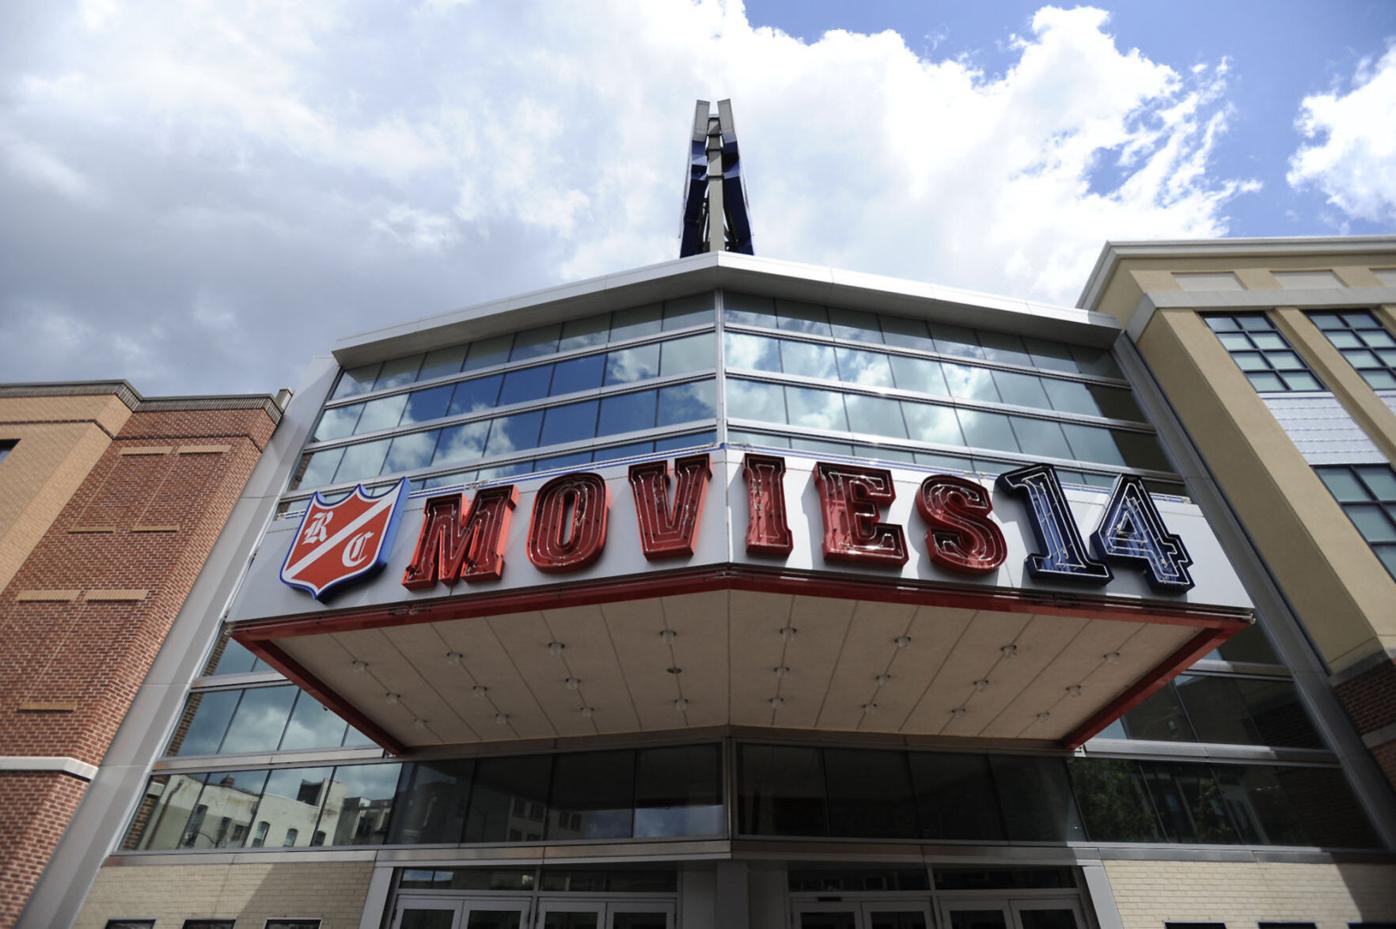 Wilkes-Barre Movies 14 to reopen Aug. 28 | News | citizensvoice.com